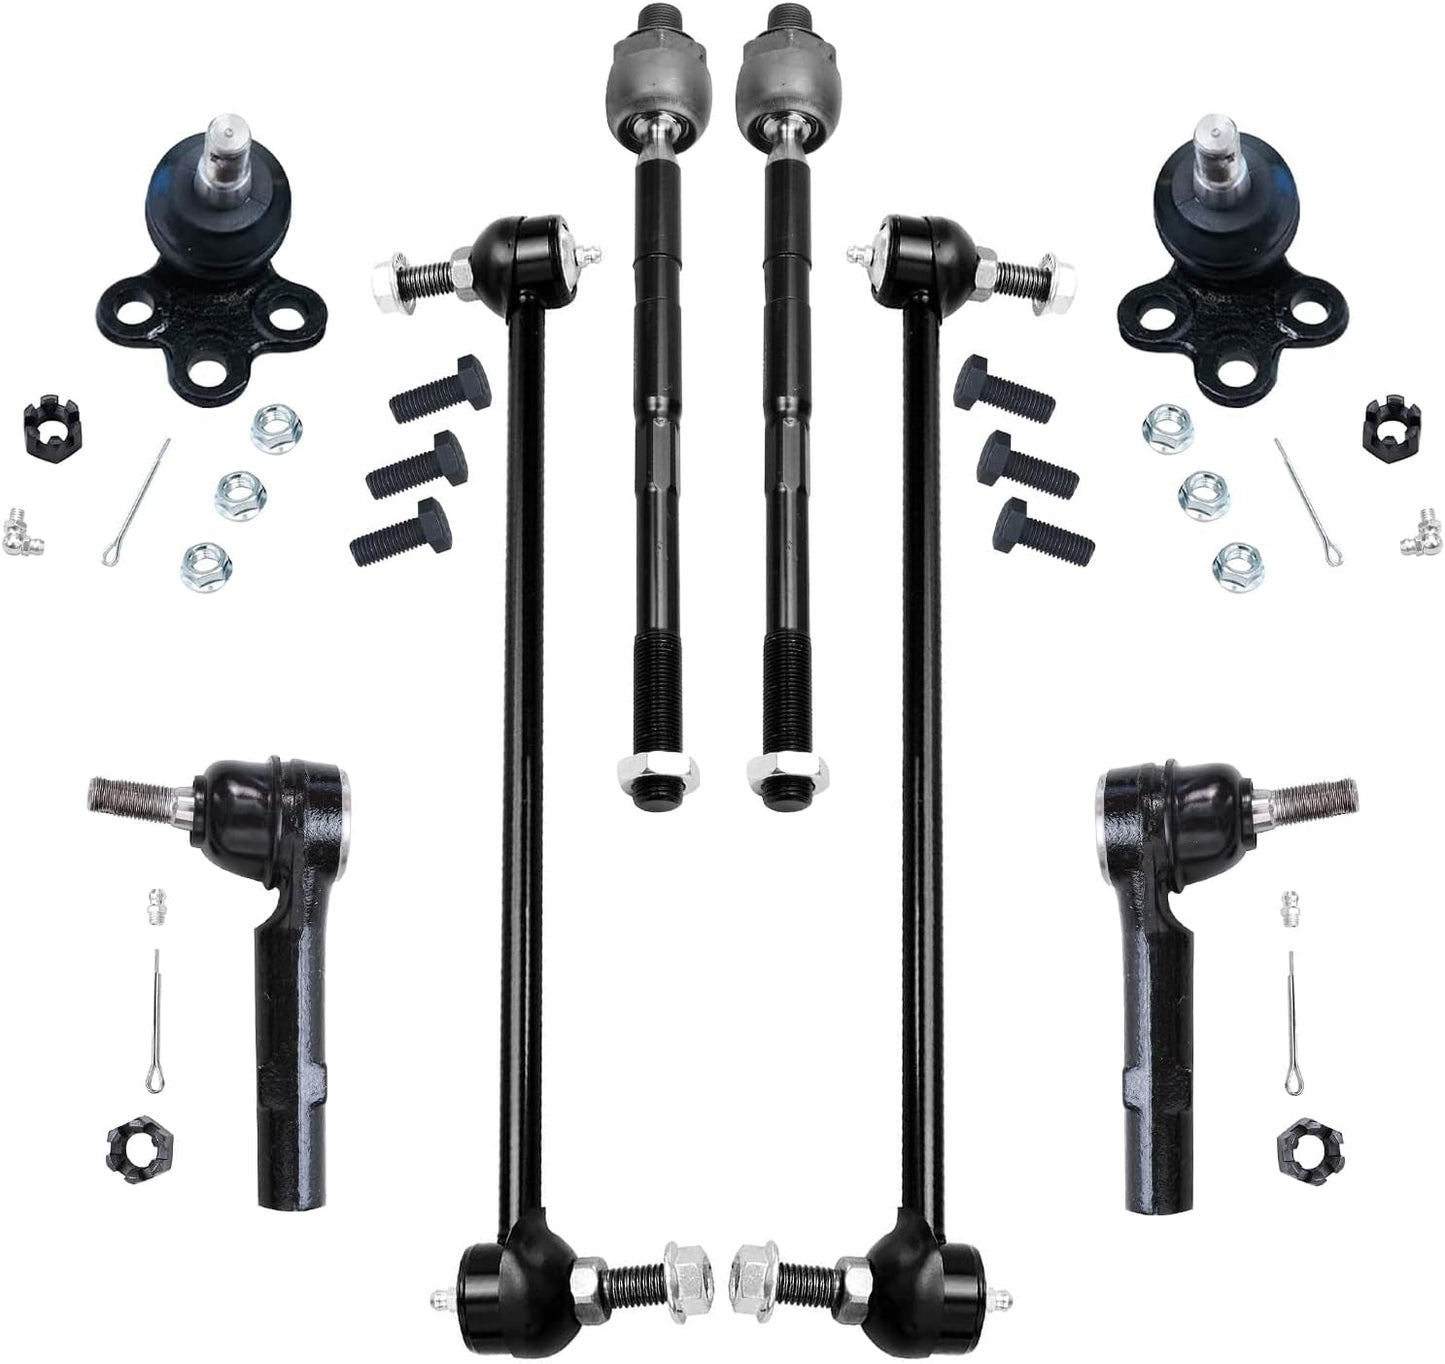 Detroit Axle - Front 8Pc Suspension Kit for Buick Enclave Chevrolet Traverse GMC Acadia Limited Saturn Outlook, 4 Tie Rod Ends 2 Sway Bars 2 Lower Ball Joints Replacement